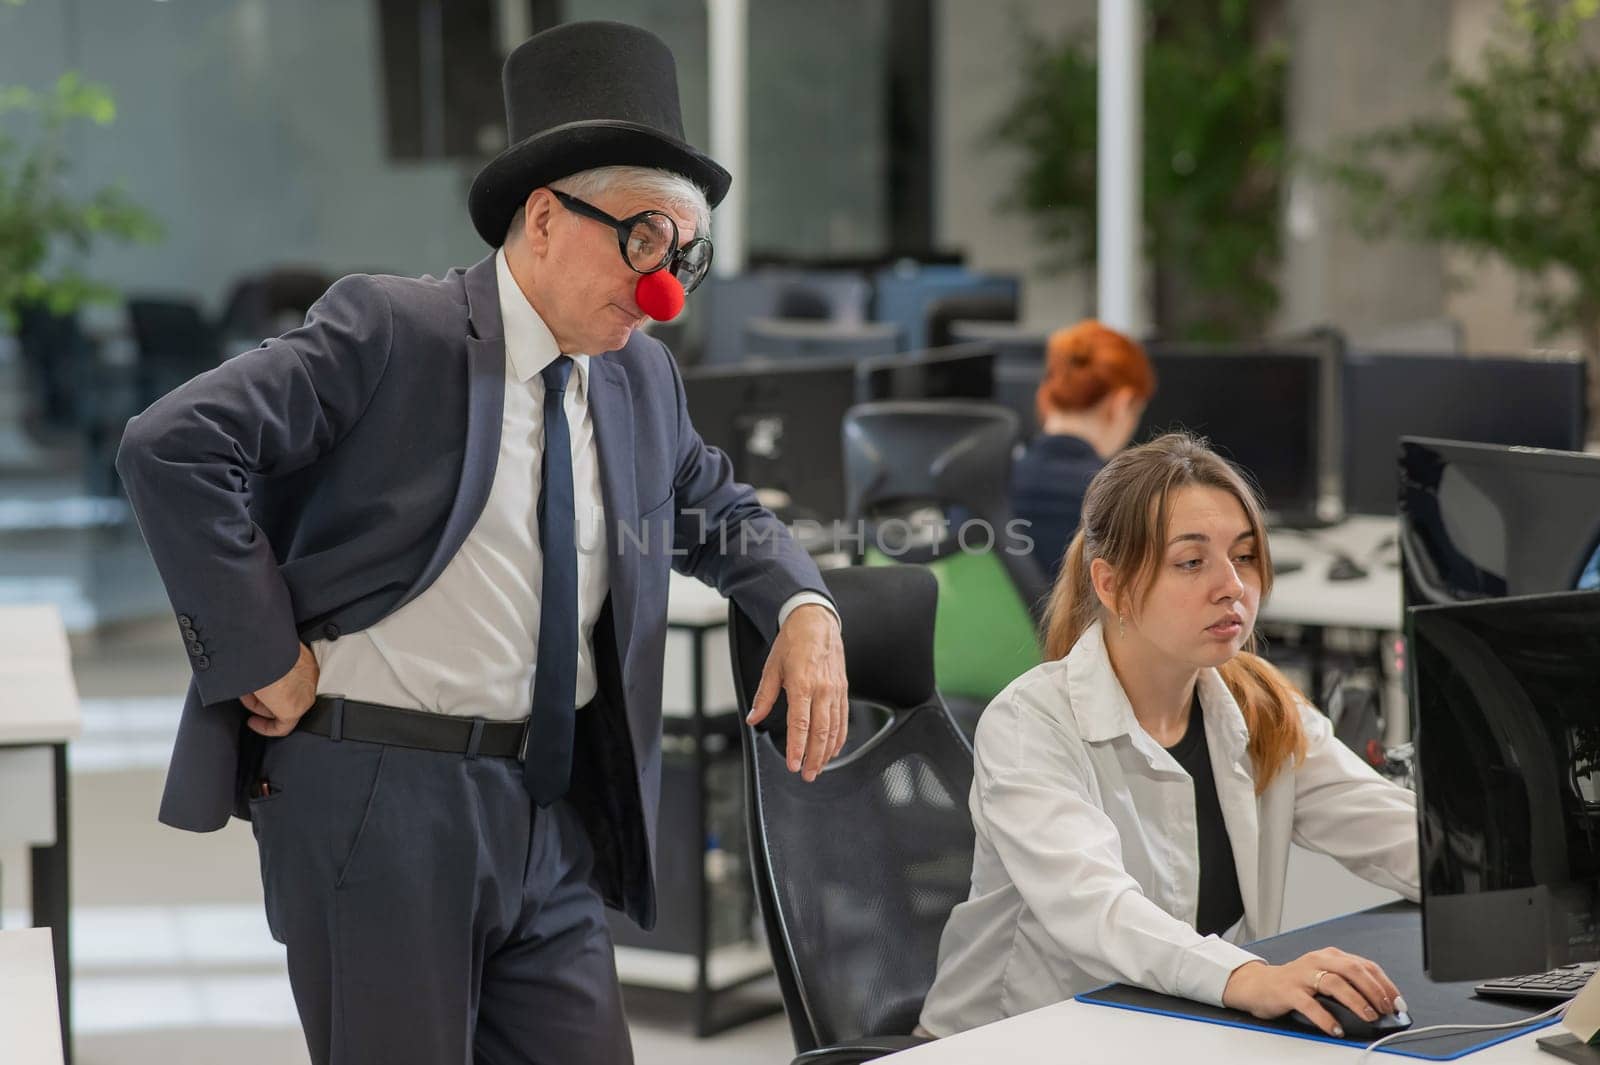 Caucasian woman works at the computer. Elderly man in clown costume in office. by mrwed54